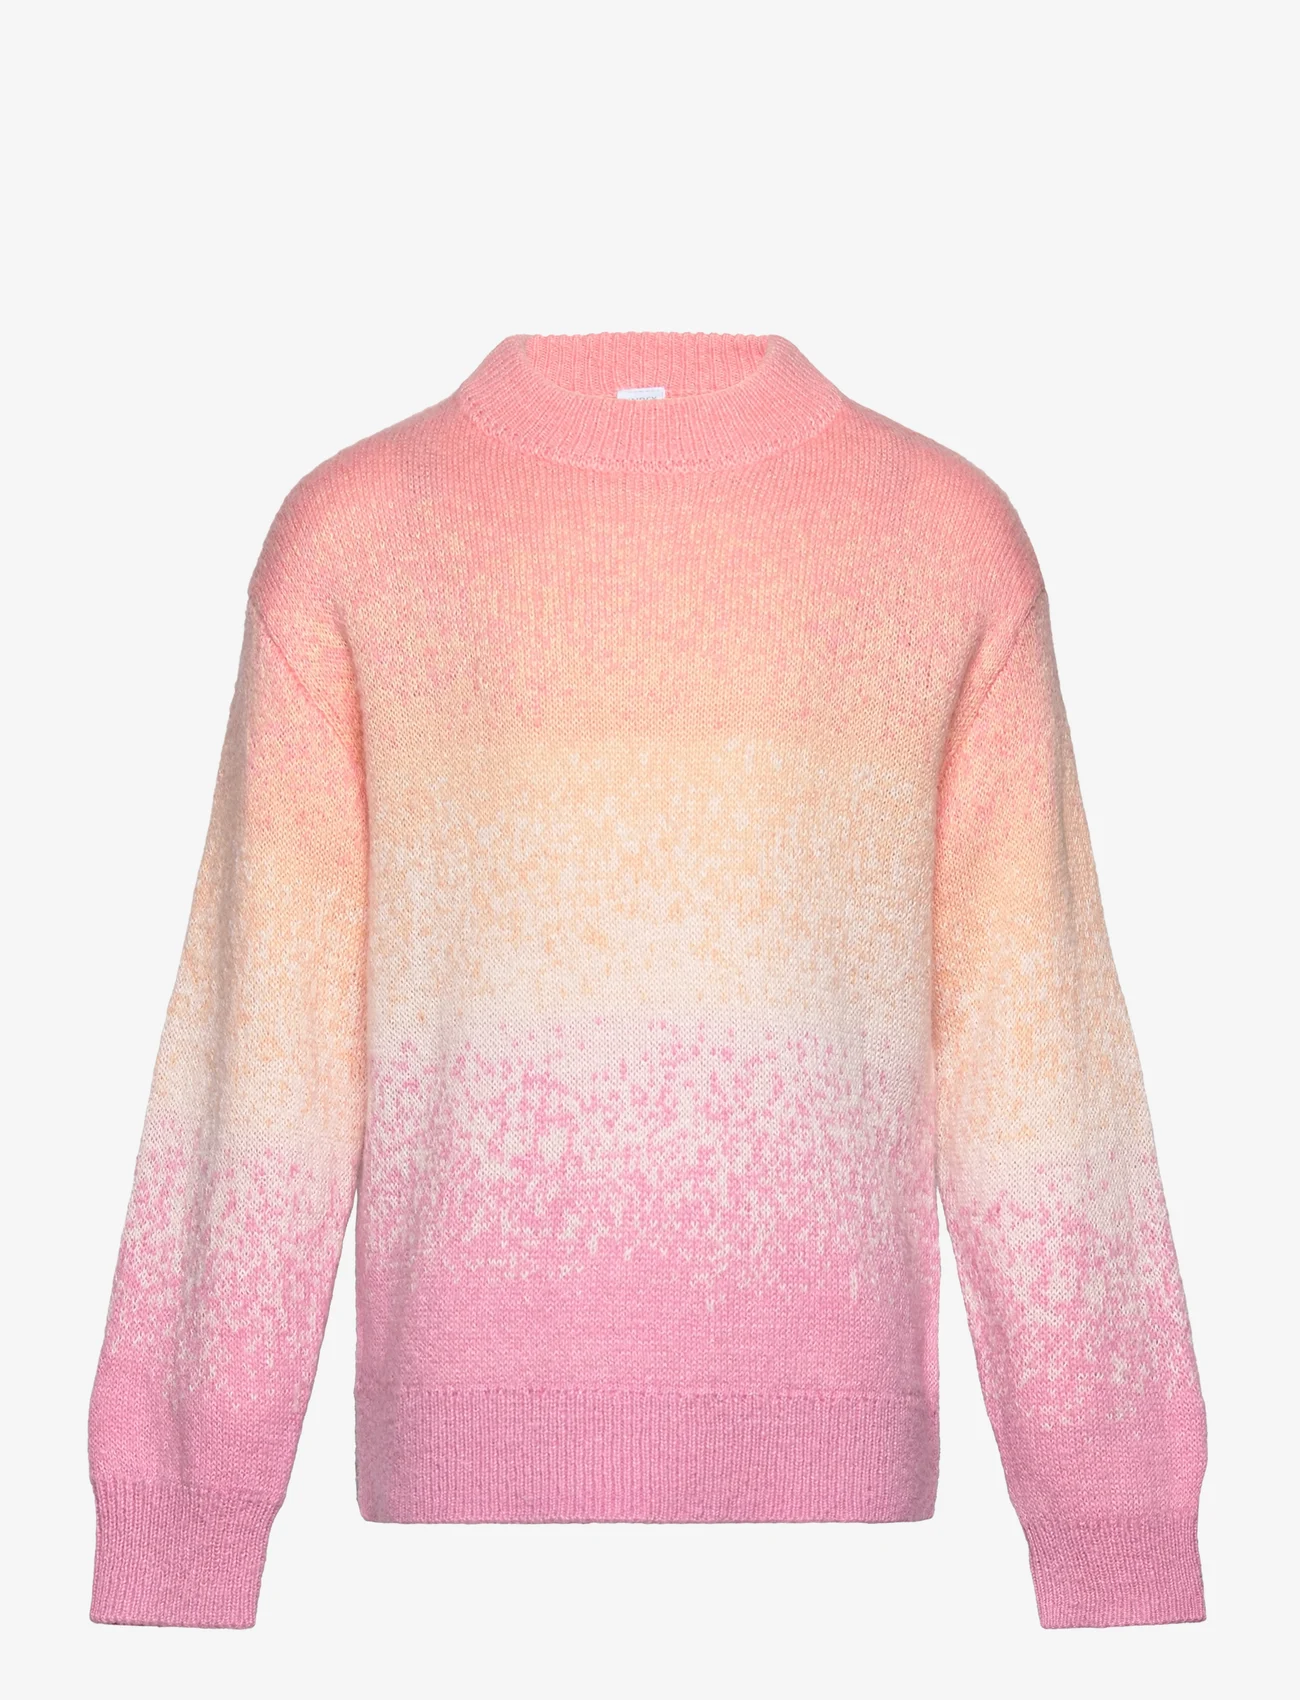 Lindex - Sweater Knitted Graded colors - pullover - pink - 0